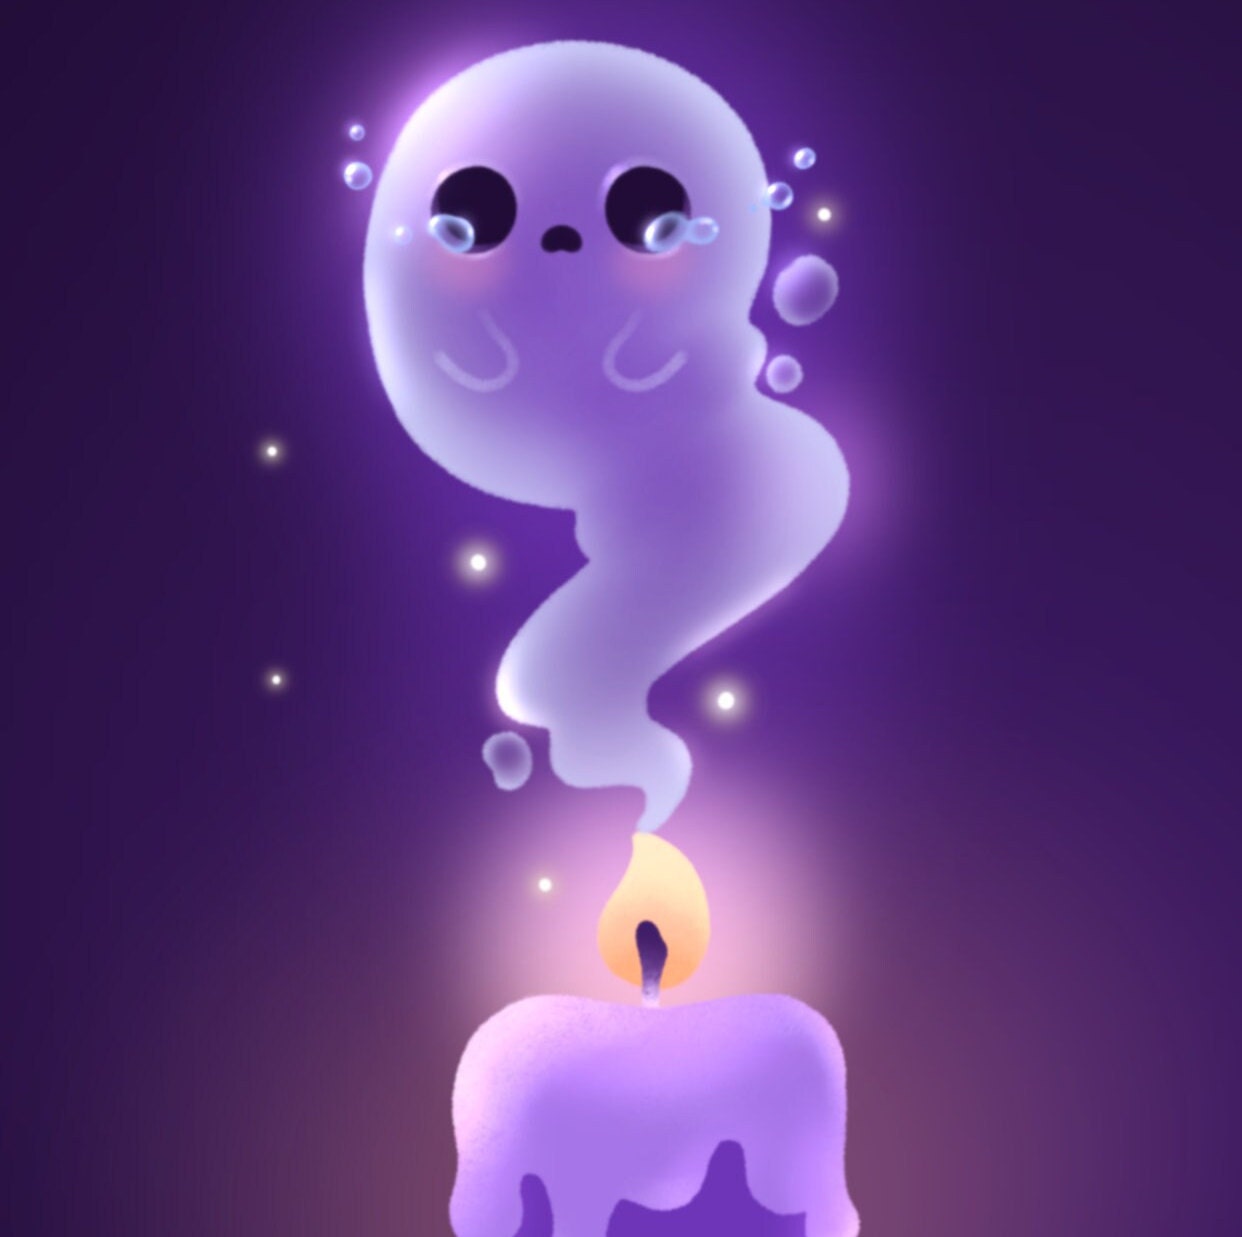 Download Mysterious Ghost Aesthetic in Cartoon Style Wallpaper | Wallpapers .com